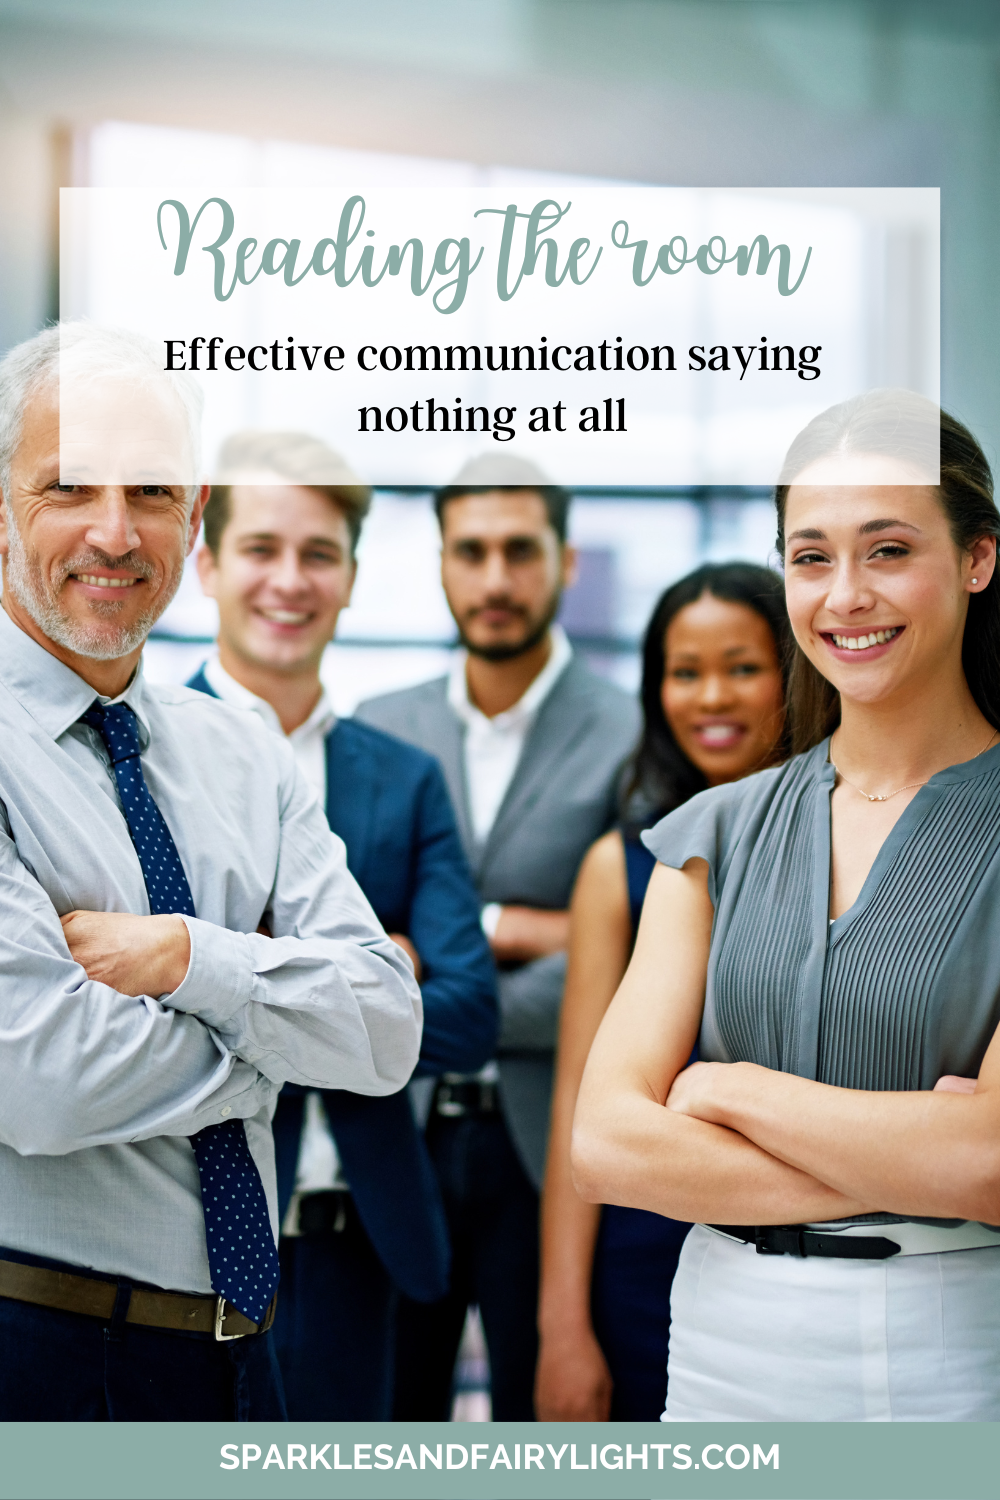 Effective communication saying nothing at all